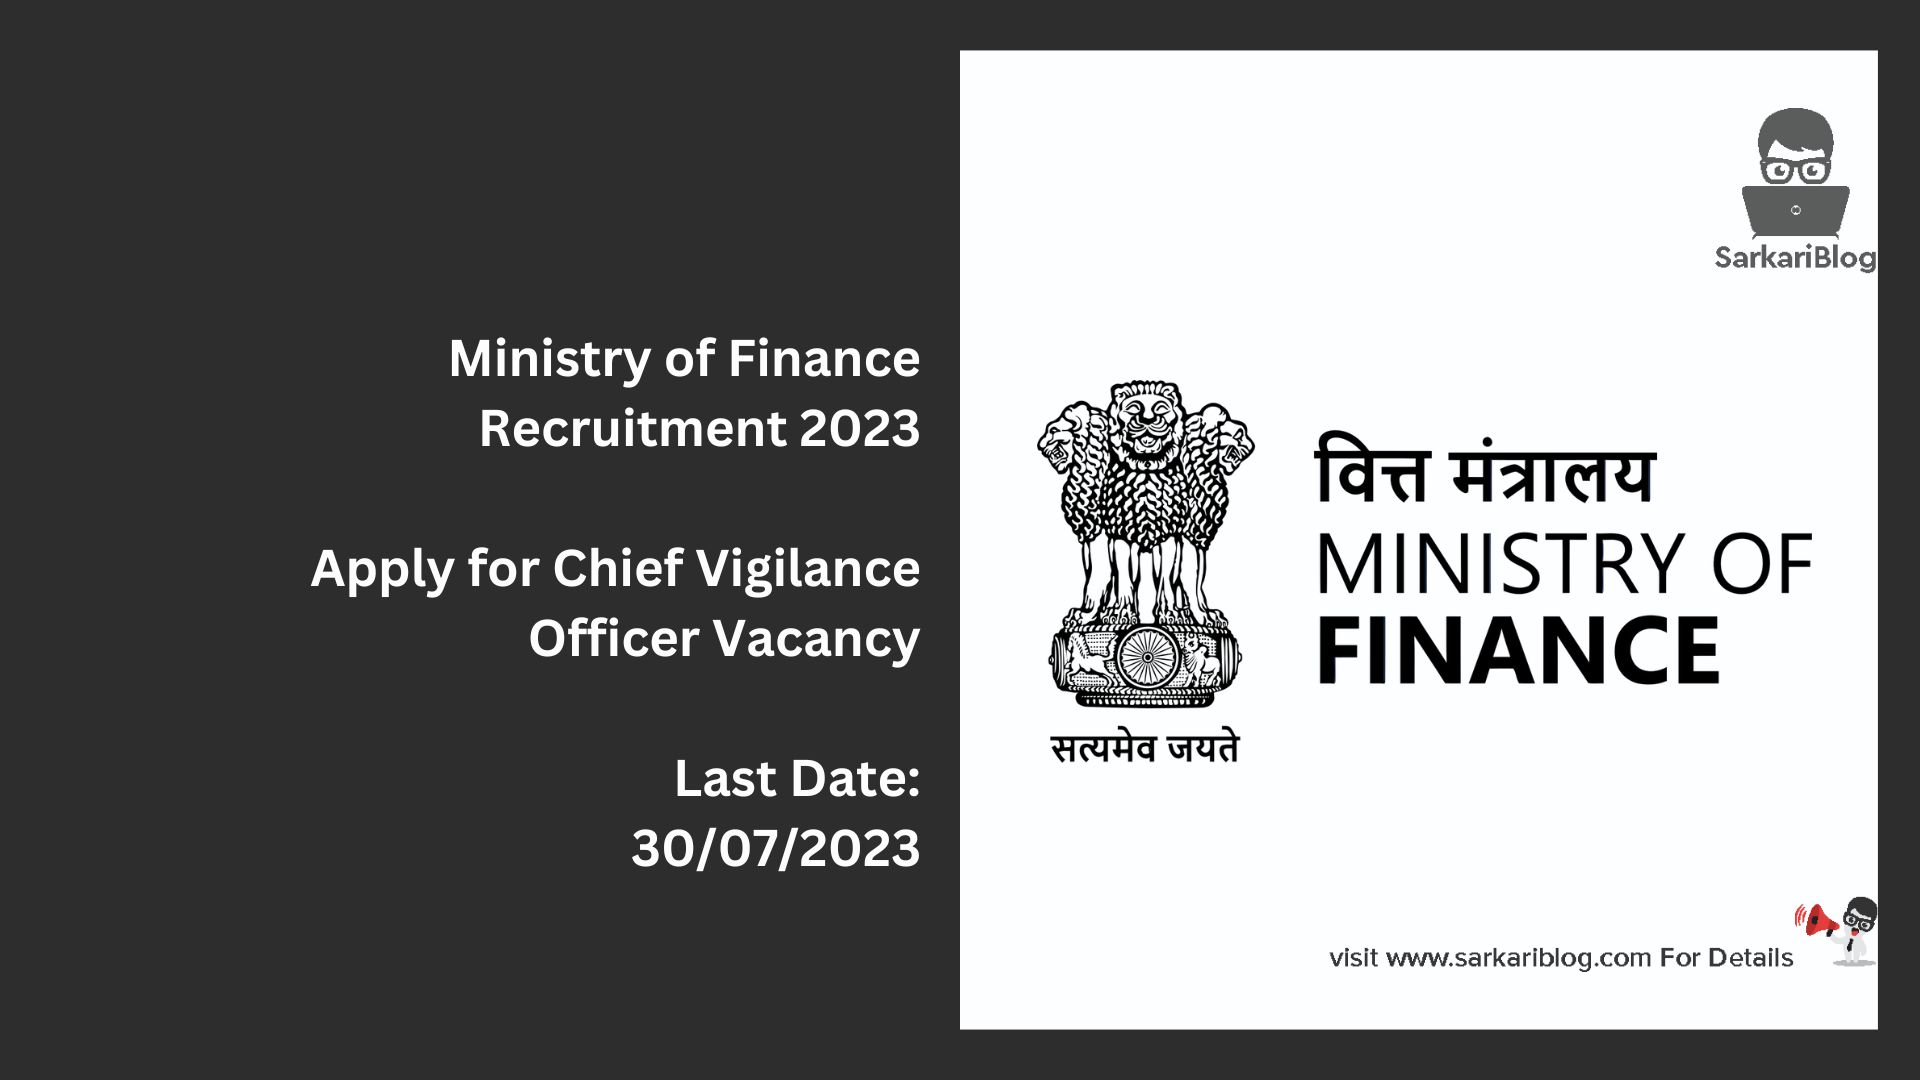 Ministry of Finance Recruitment 2023